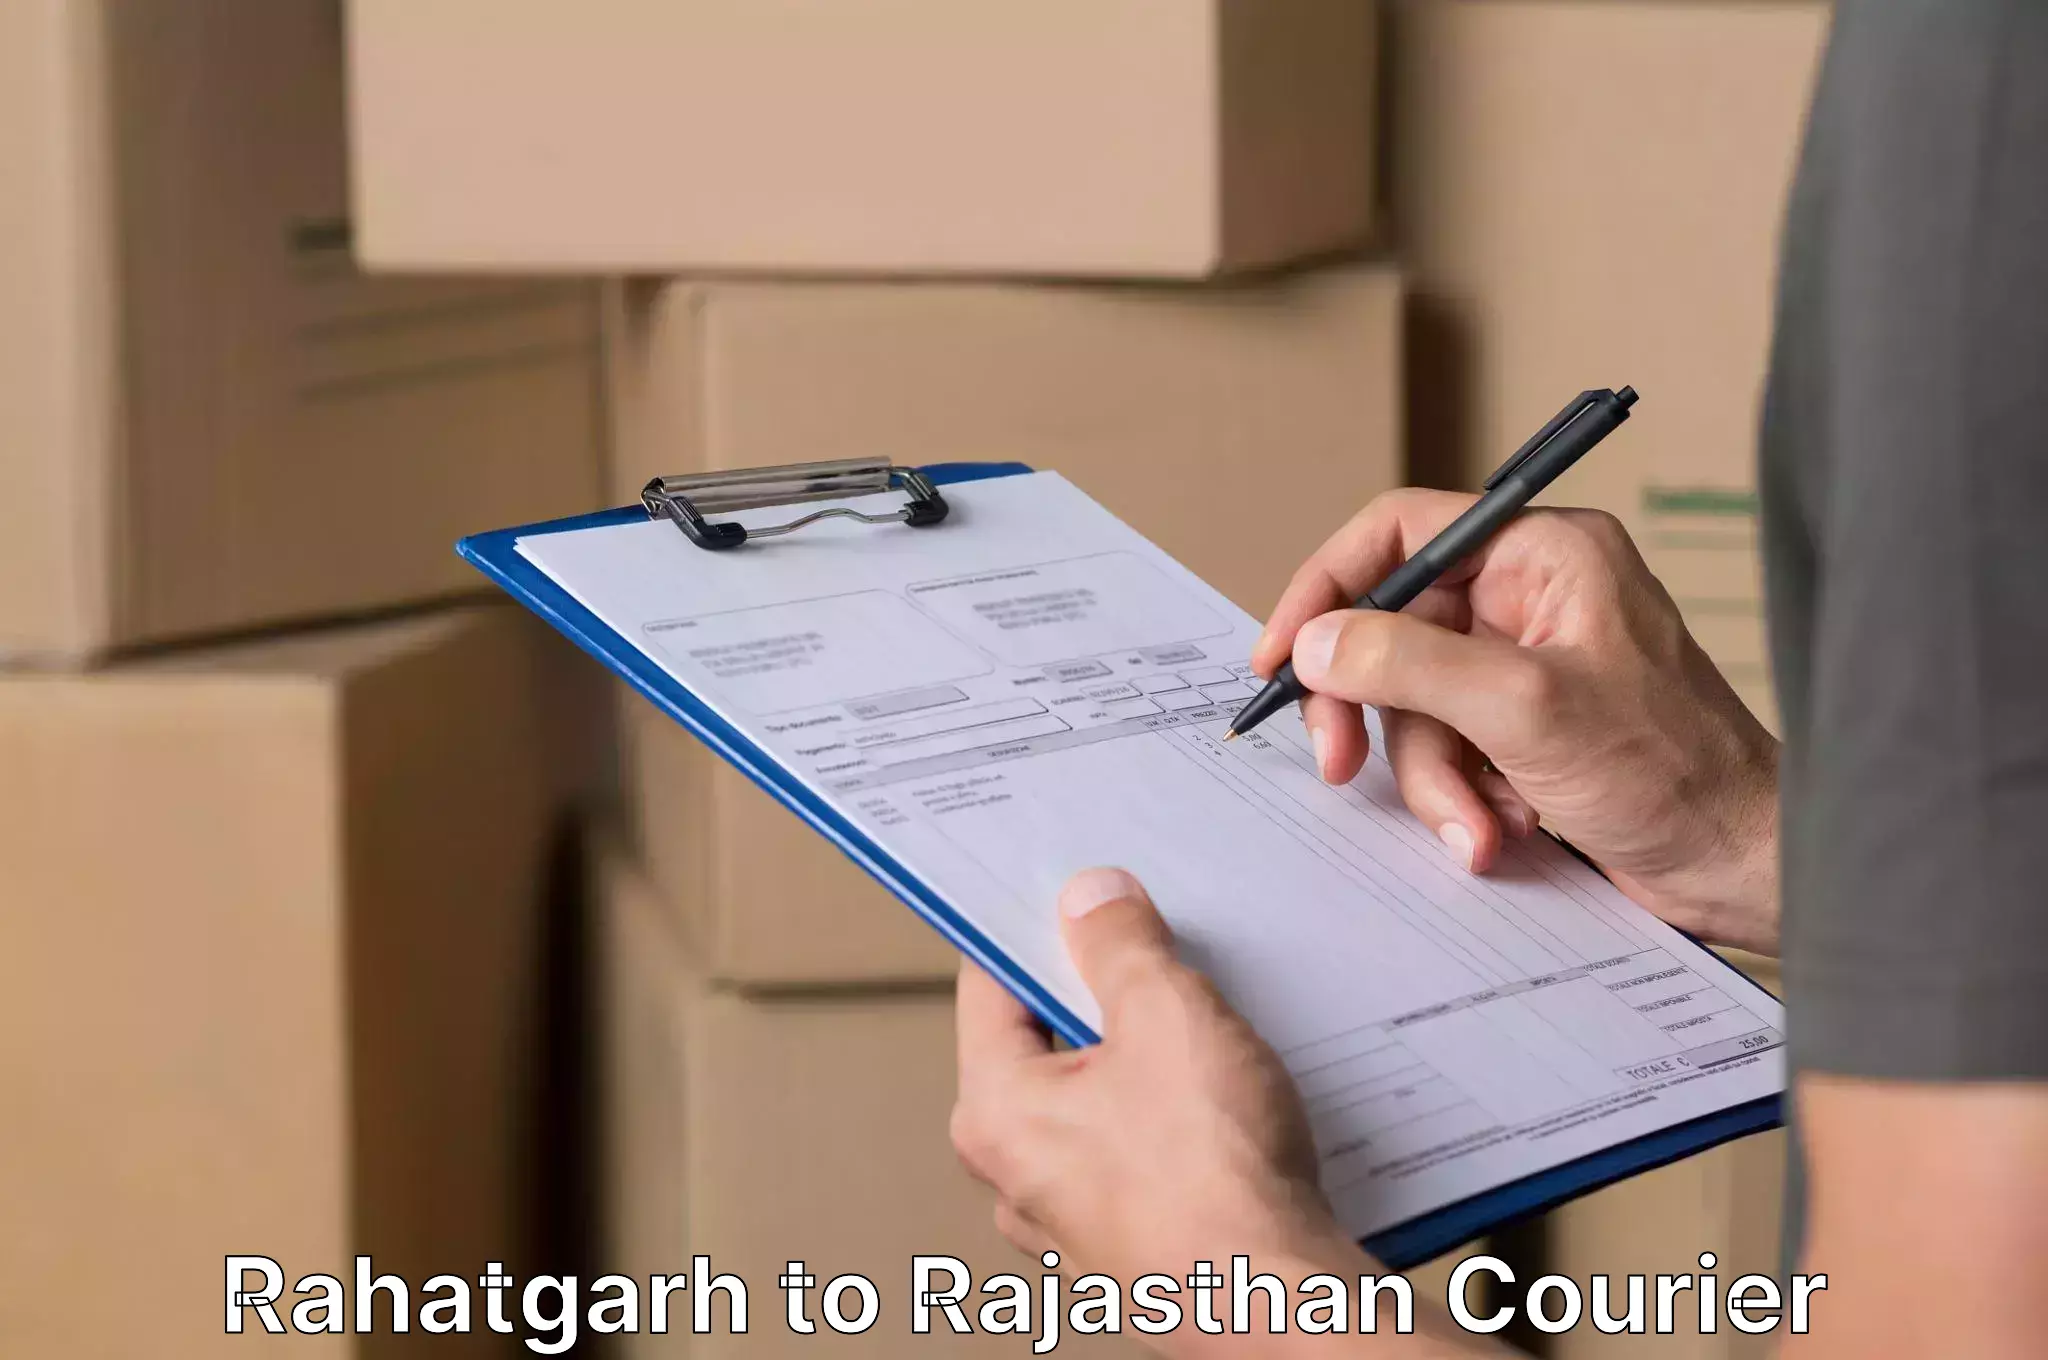 Household moving experts Rahatgarh to Ajmer